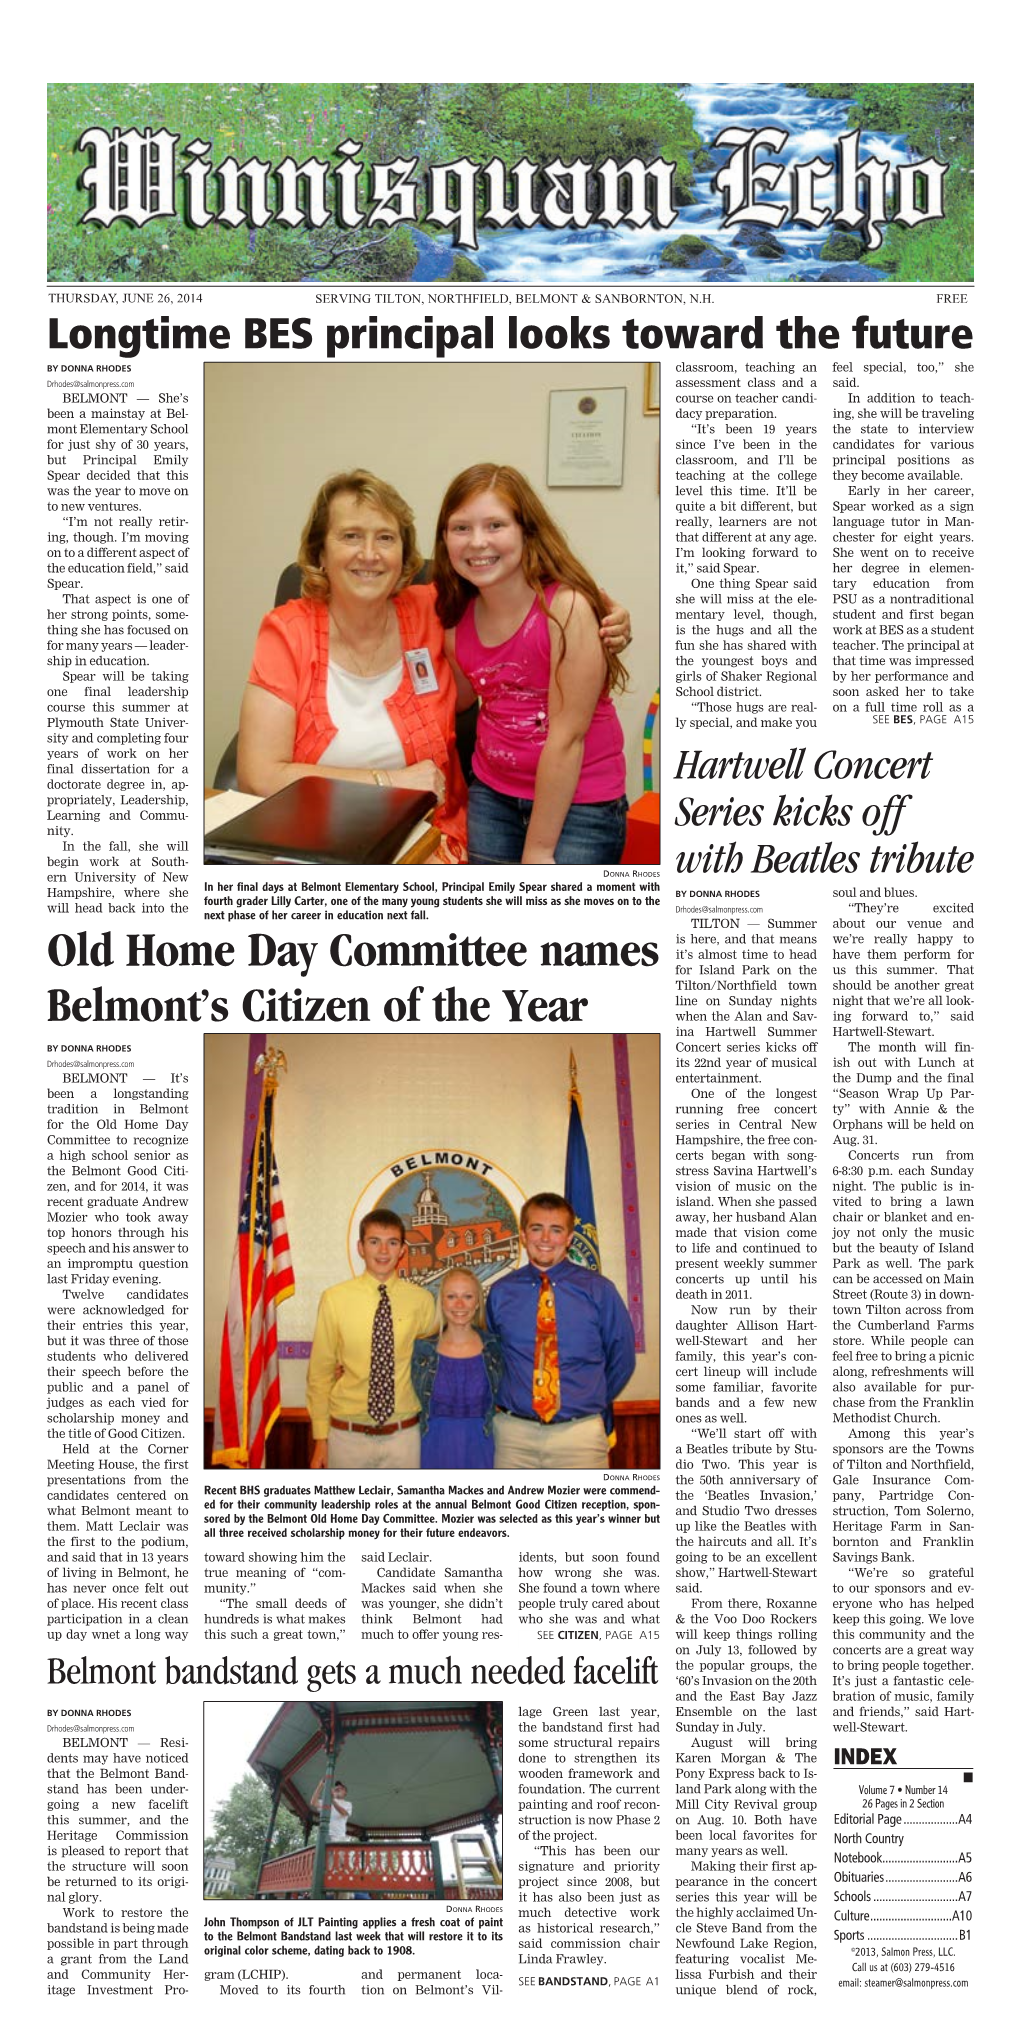 Old Home Day Committee Names Belmont's Citizen of the Year